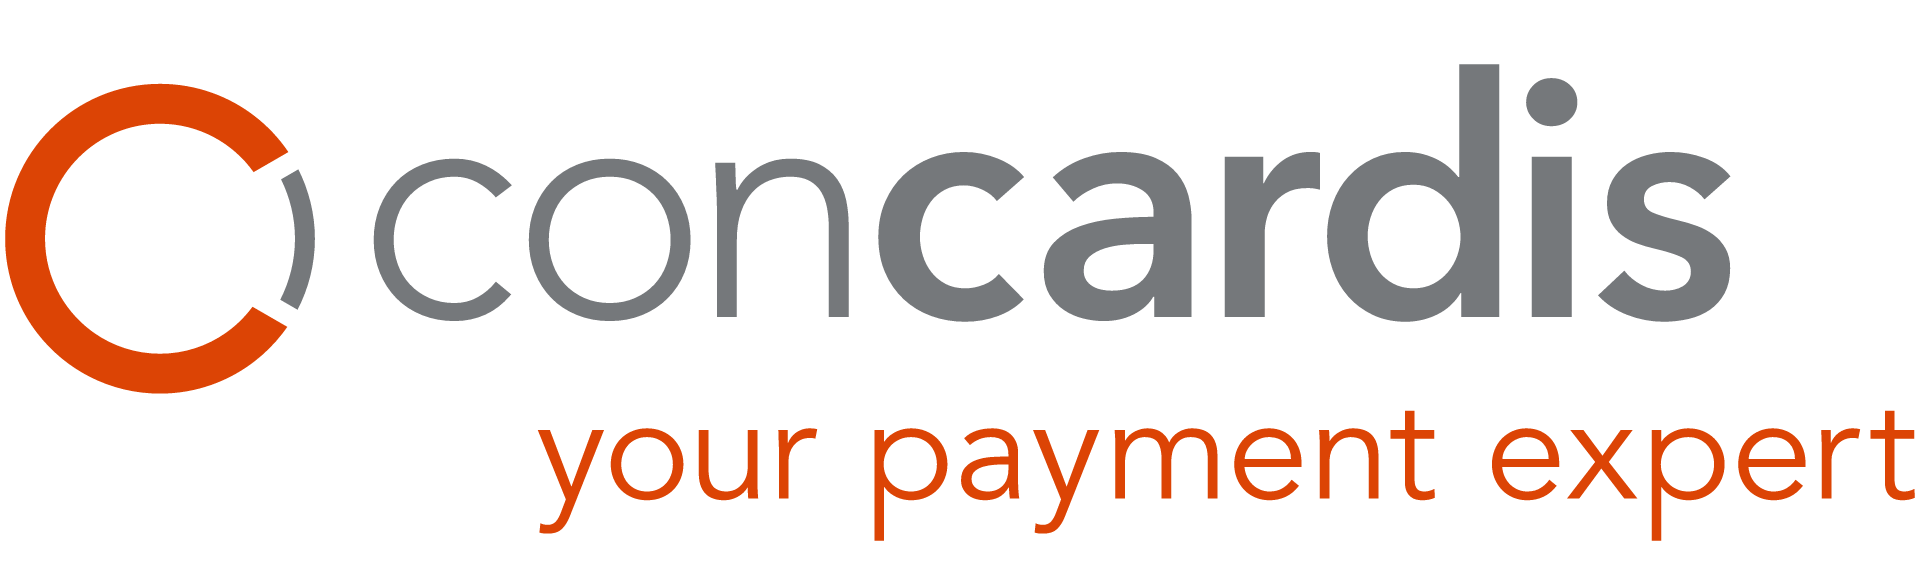 Concardis GmbH - your payment expert!